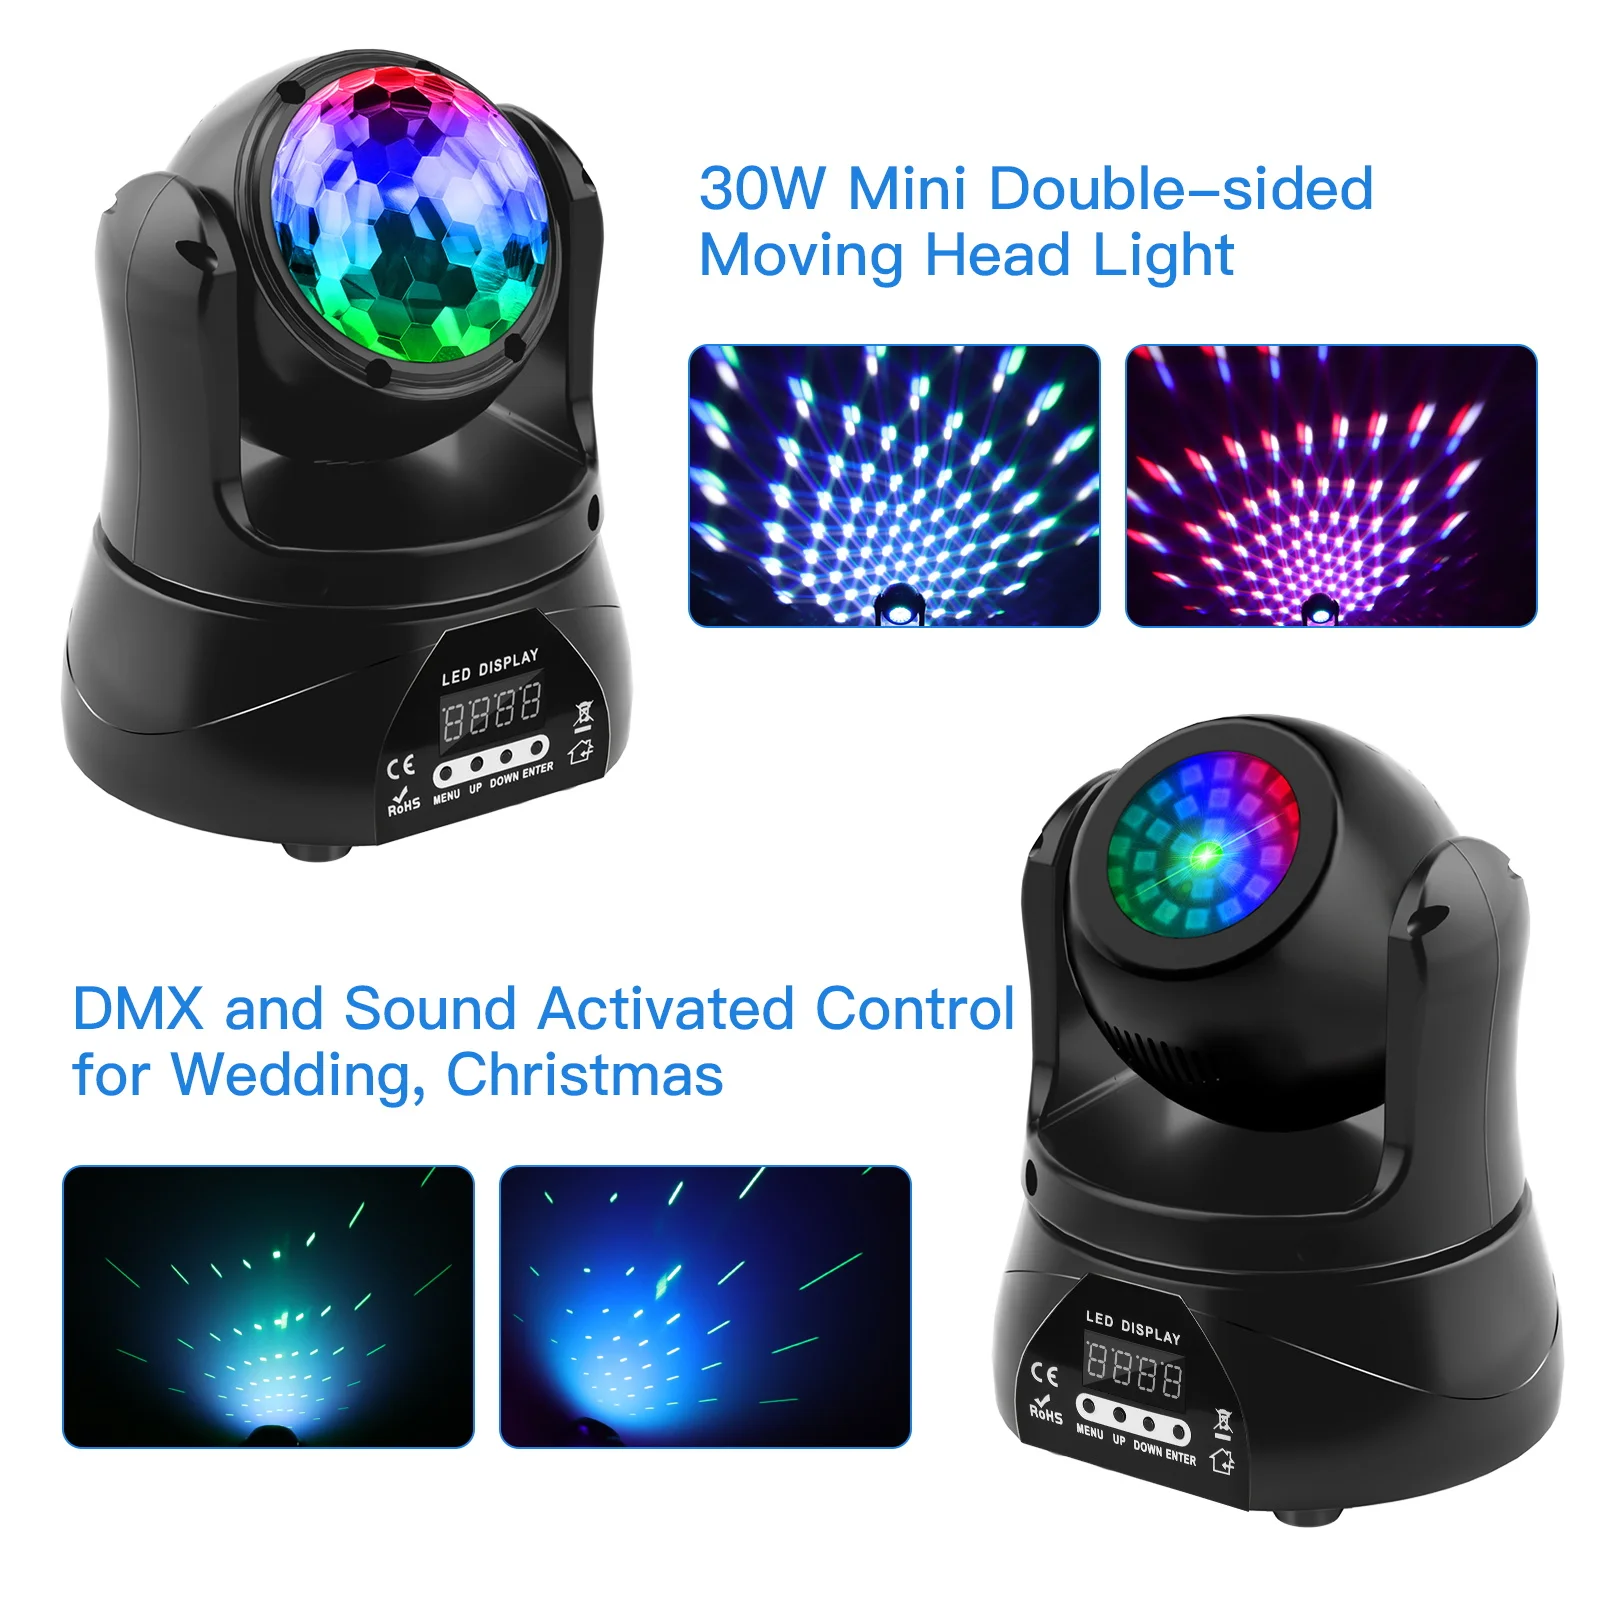 LED Moving Head Light 30W Double Sided Moving Heads DJ Lights with Kaleidoscope DMX Sound Control Spotlight for Wedding Bar